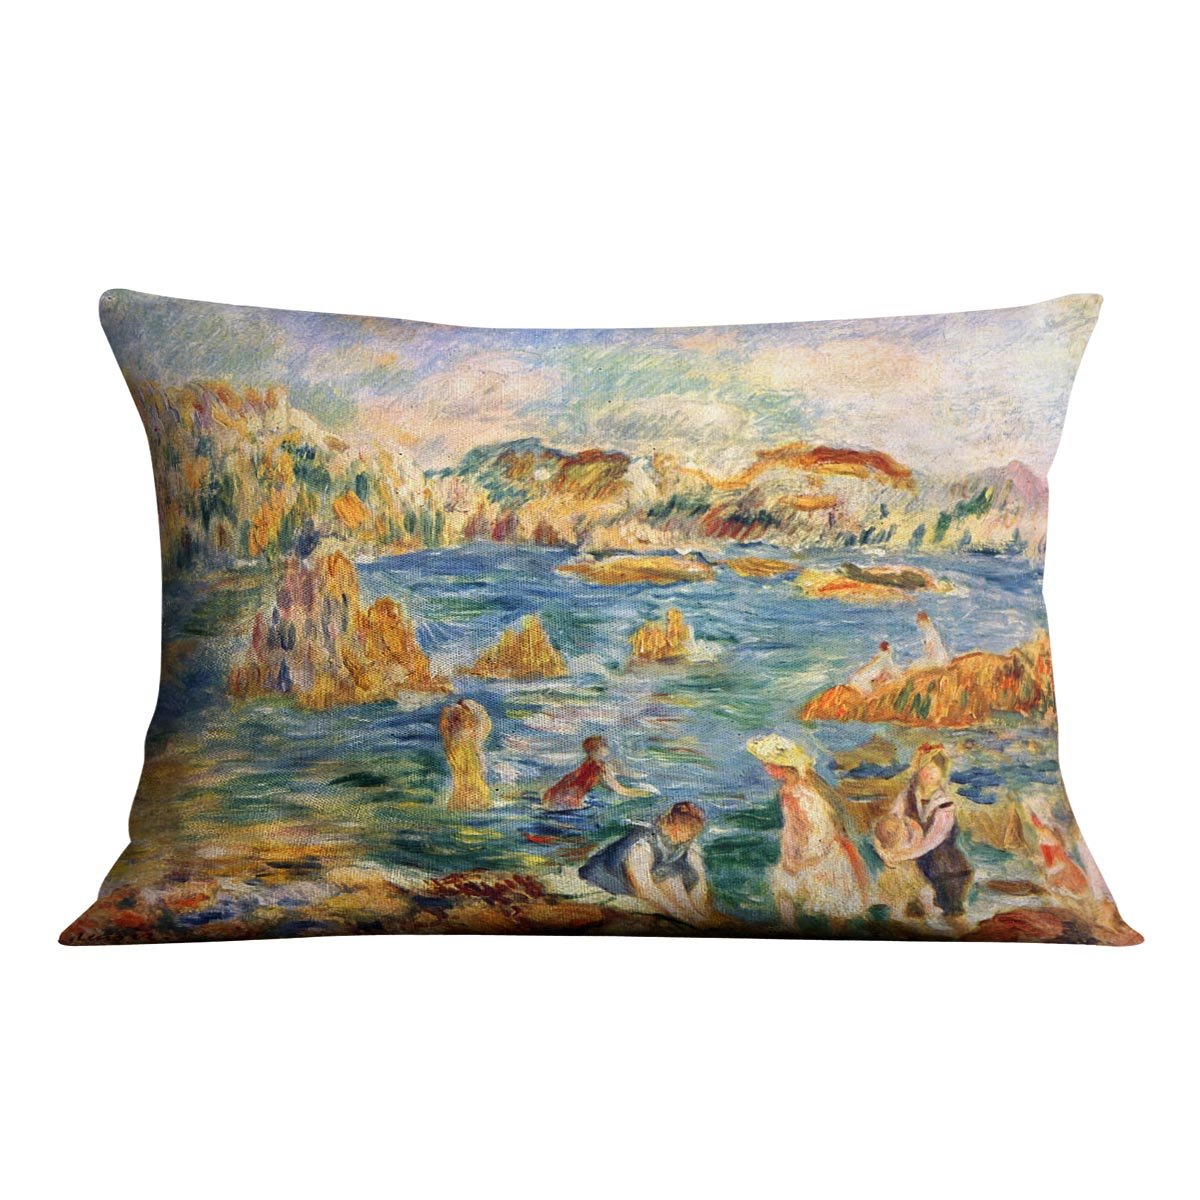 At the beach of Guernesey by Renoir Throw Pillow